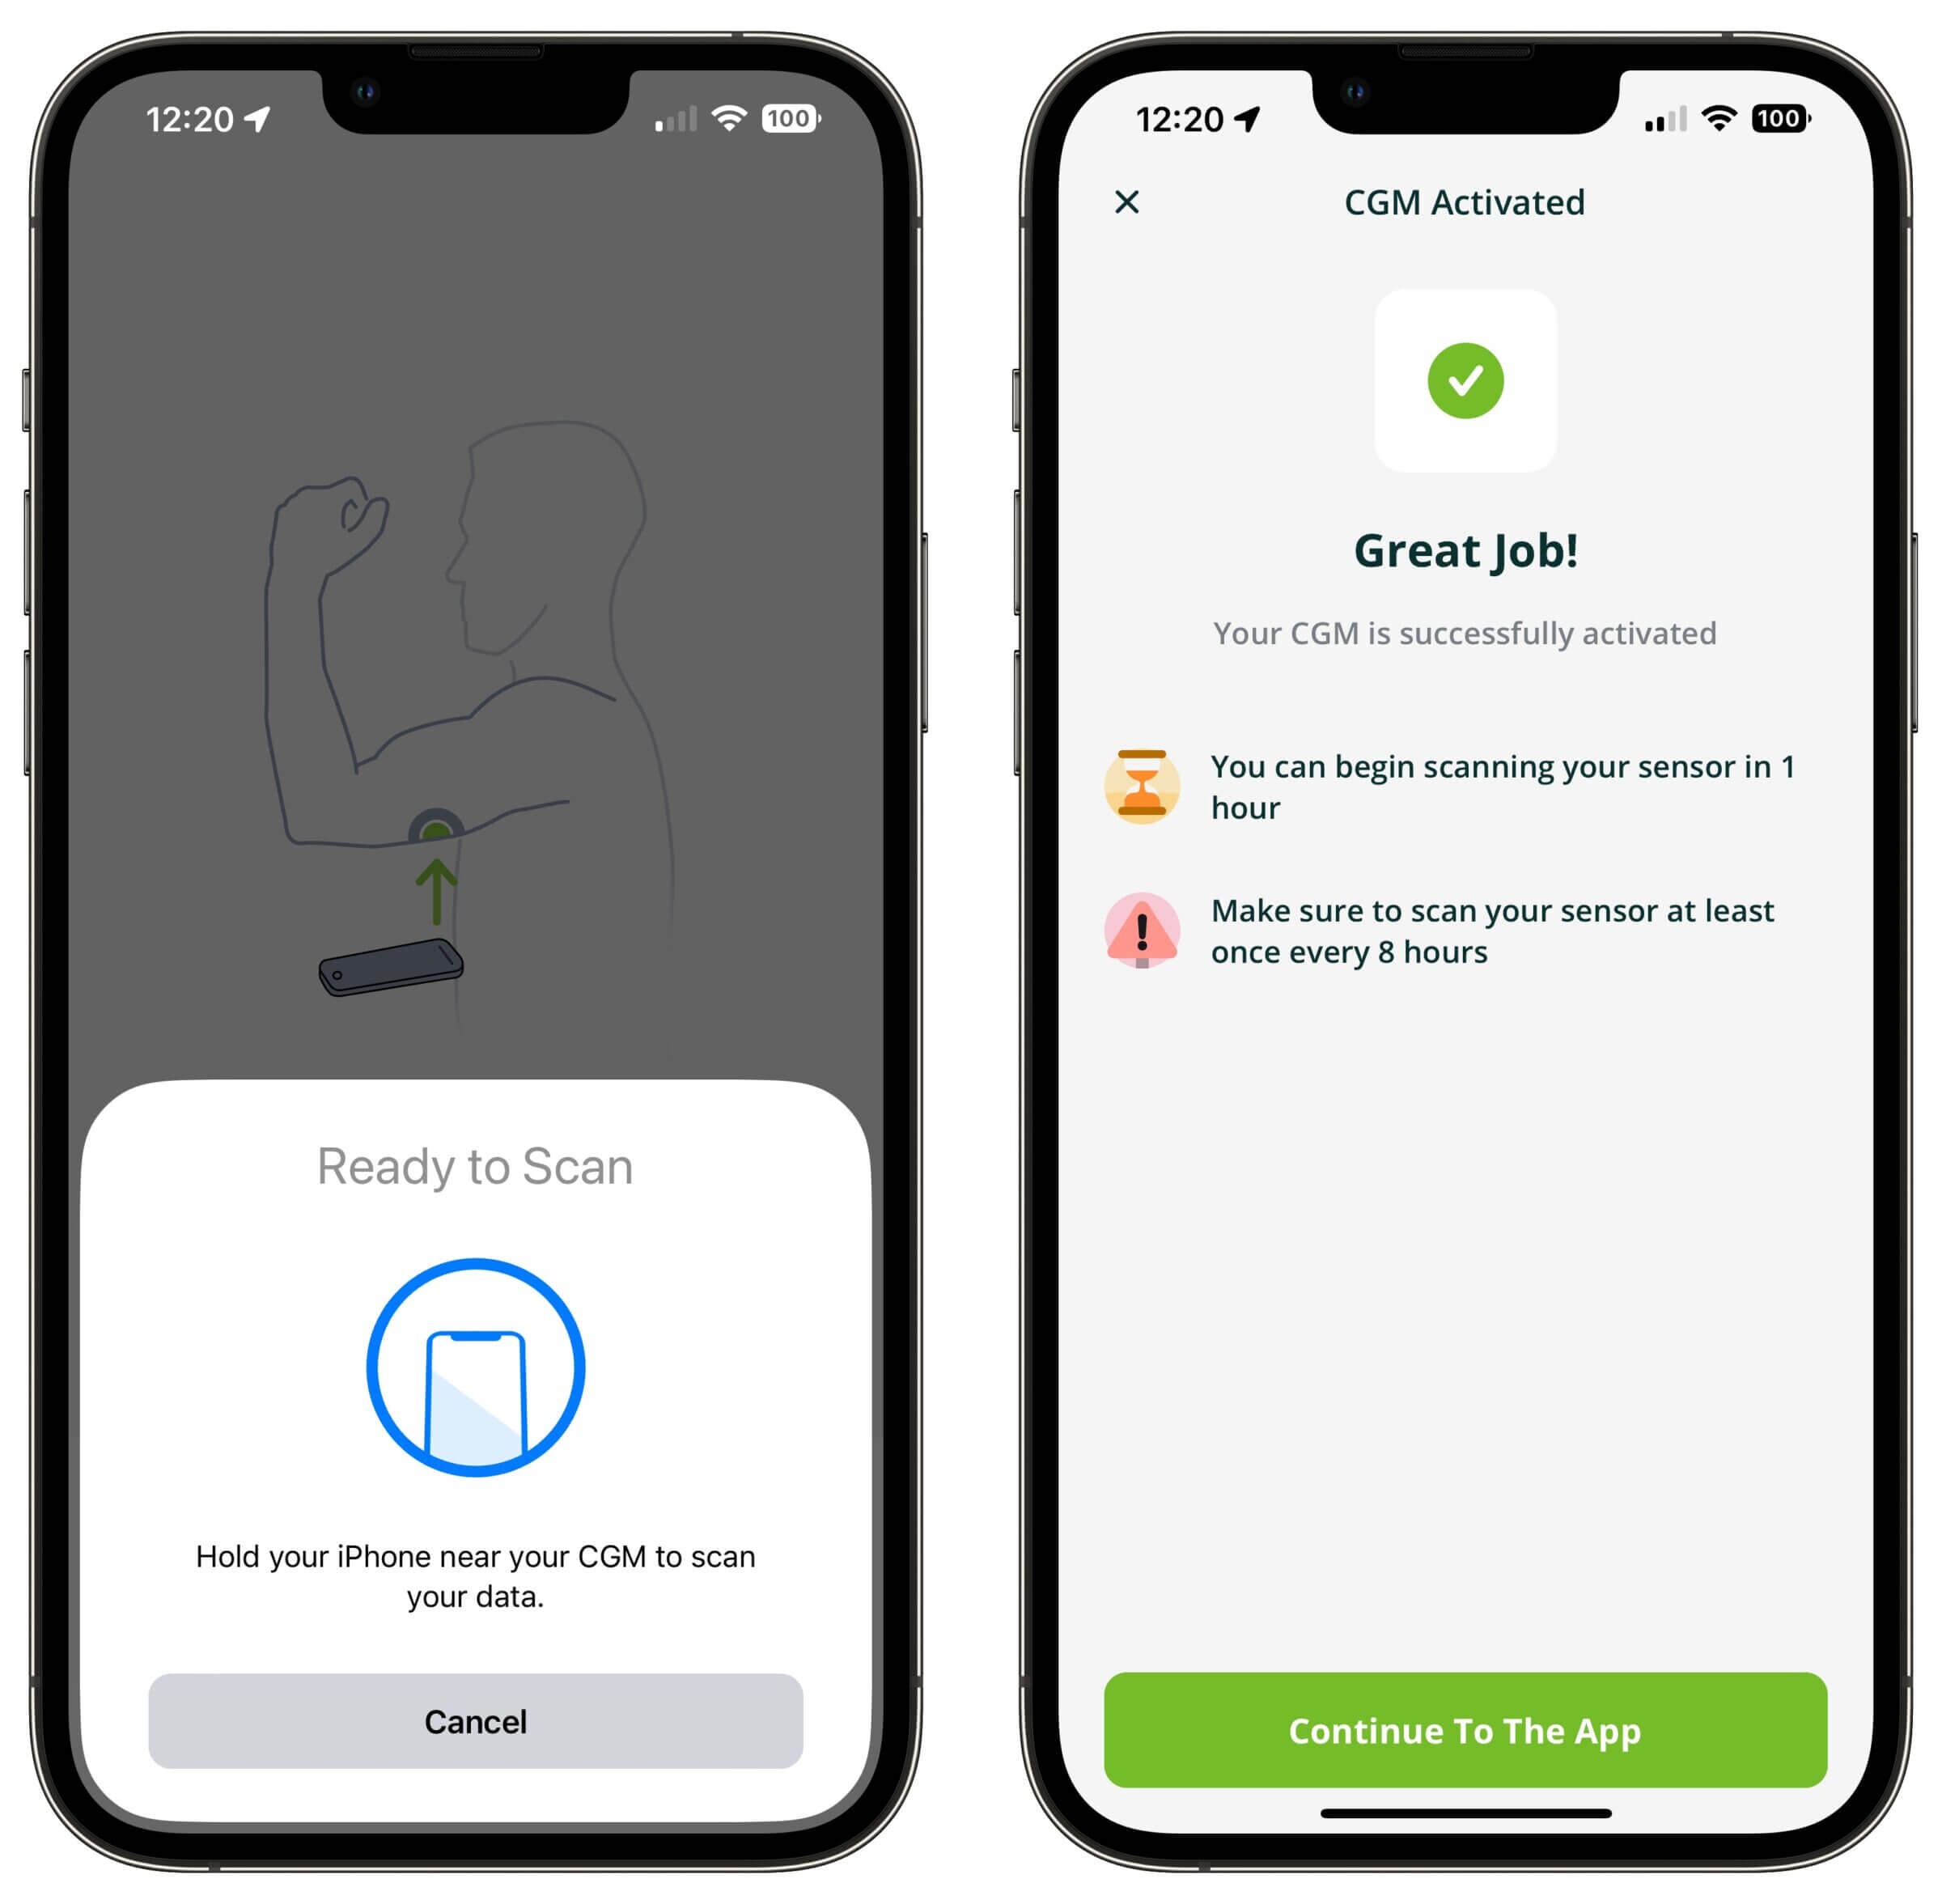 You can connect and scan your FreeStyle Libre sensor directly from within the NutriSense app.